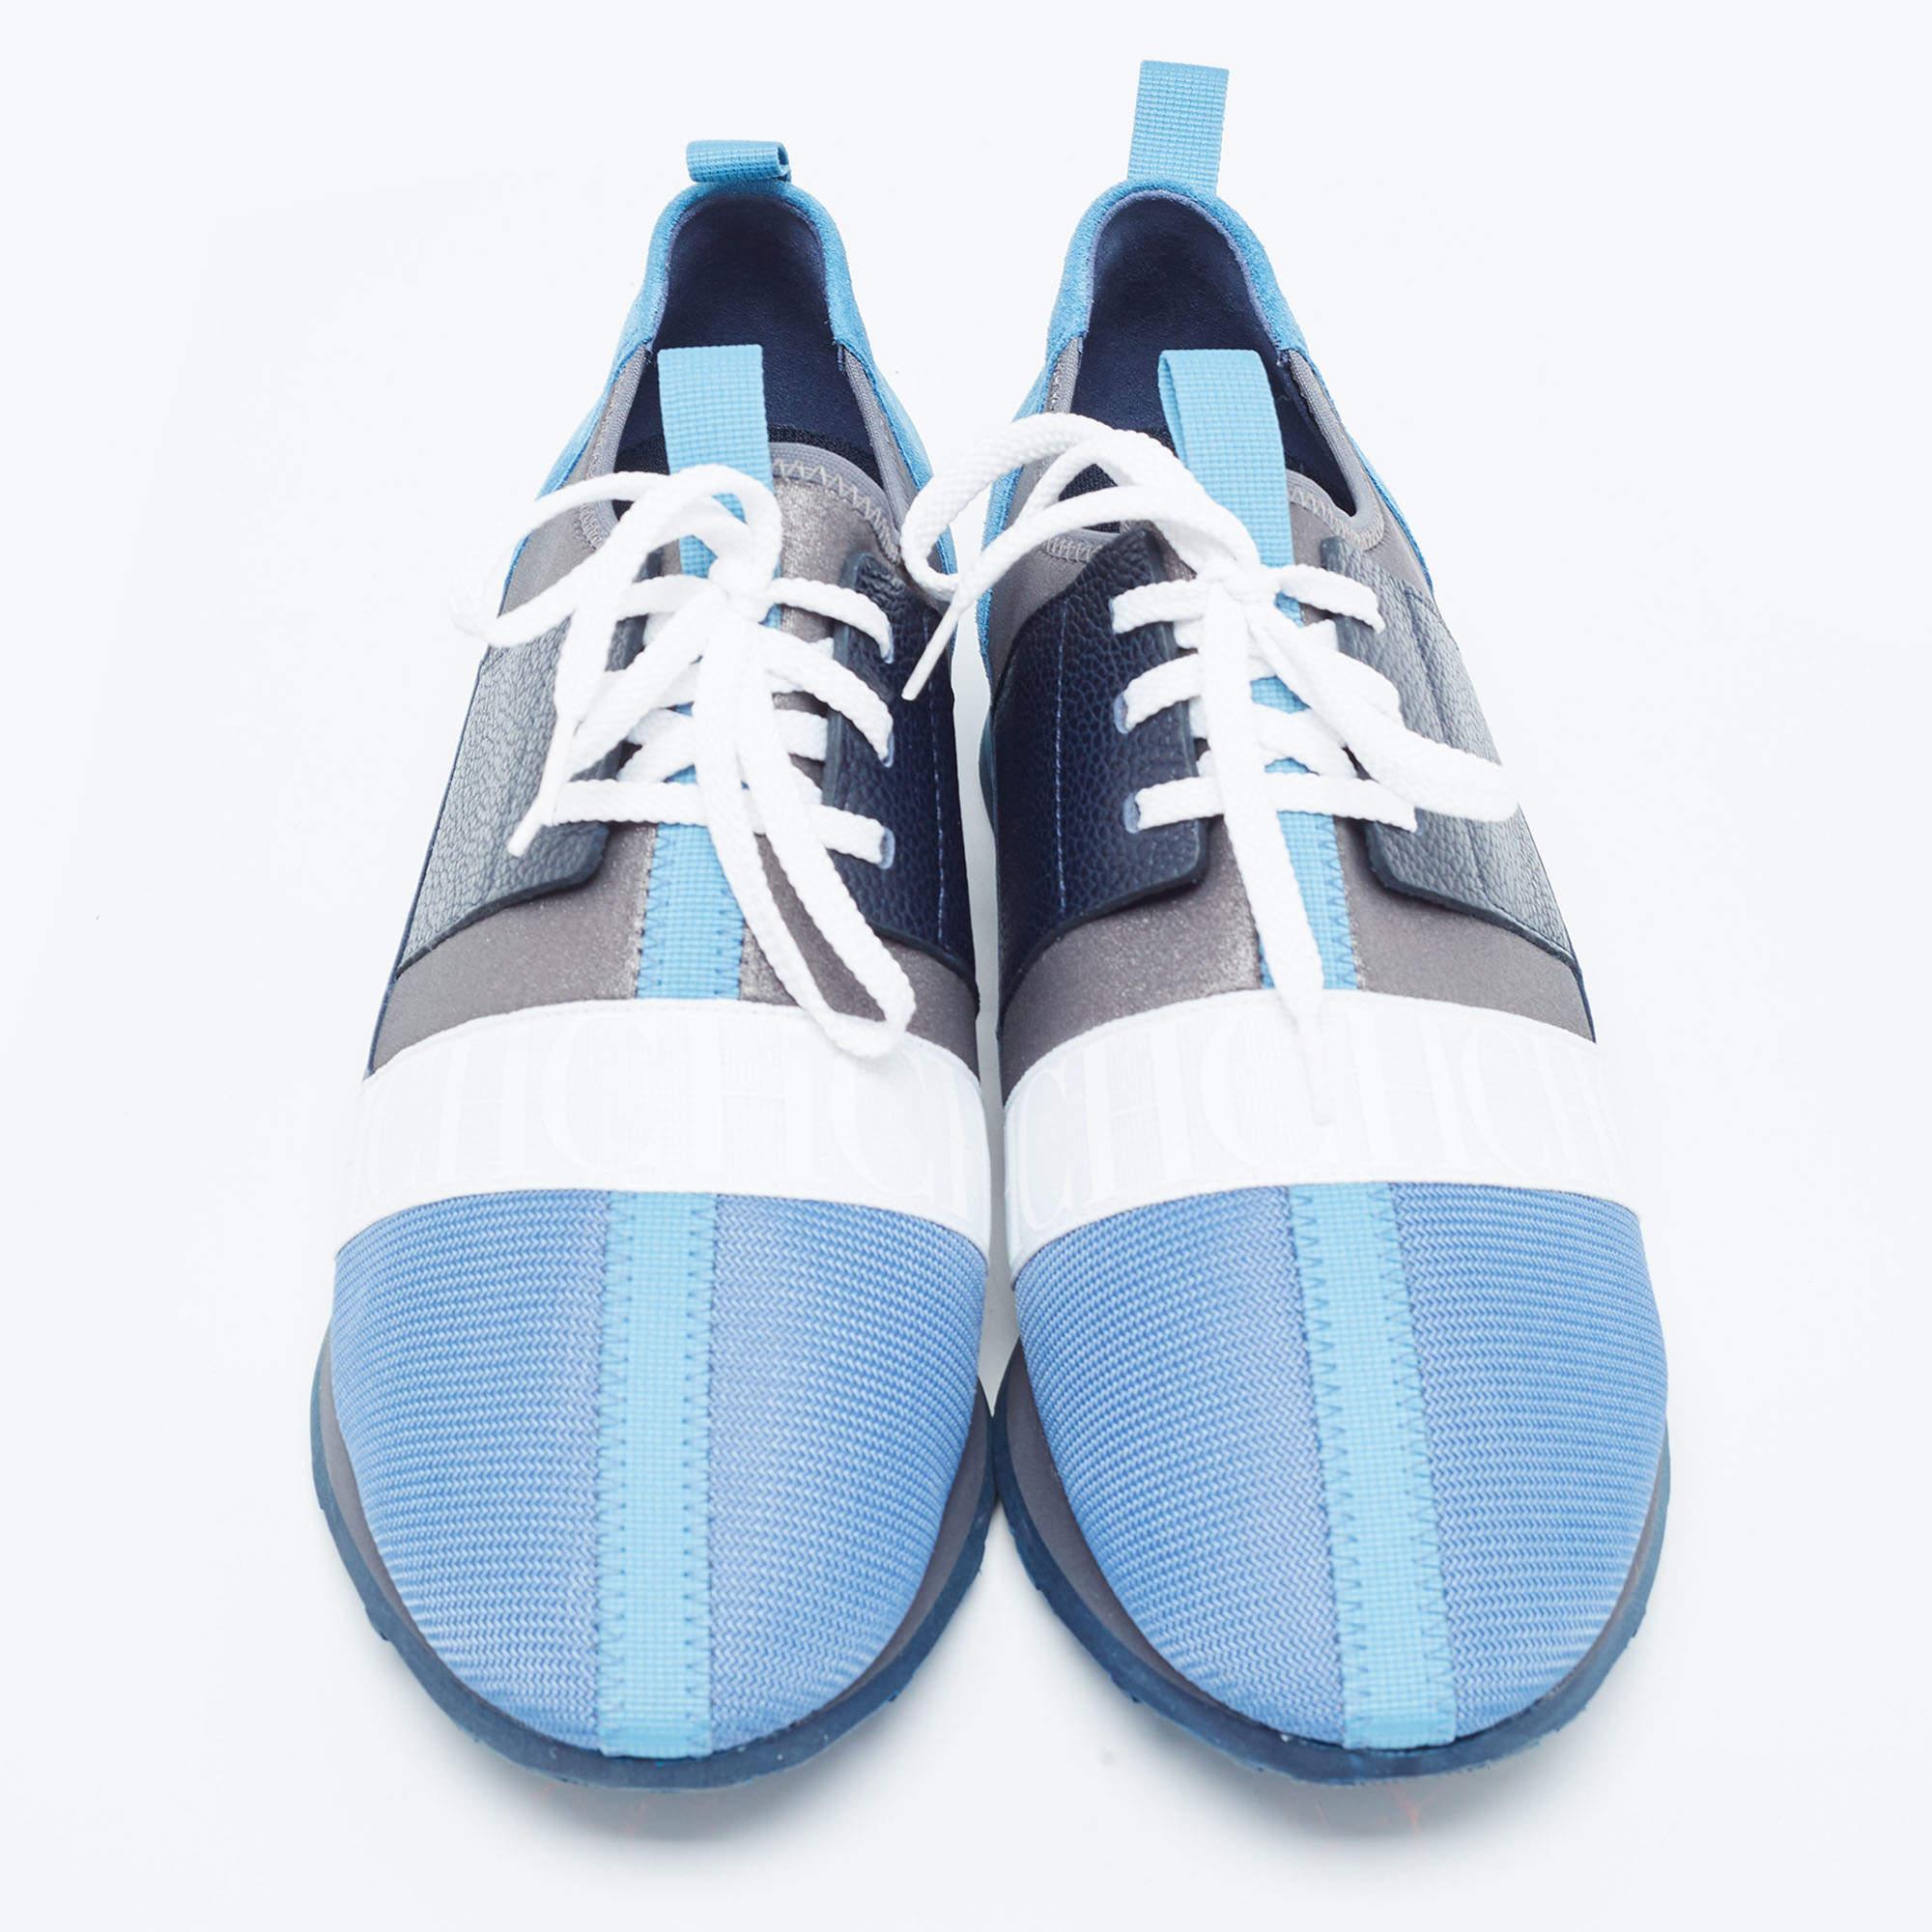 Give your outfit a chic update with this pair of designer sneakers. The creation is sewn perfectly to help you make a statement in them for a long time.

Includes: Original Dustbag

